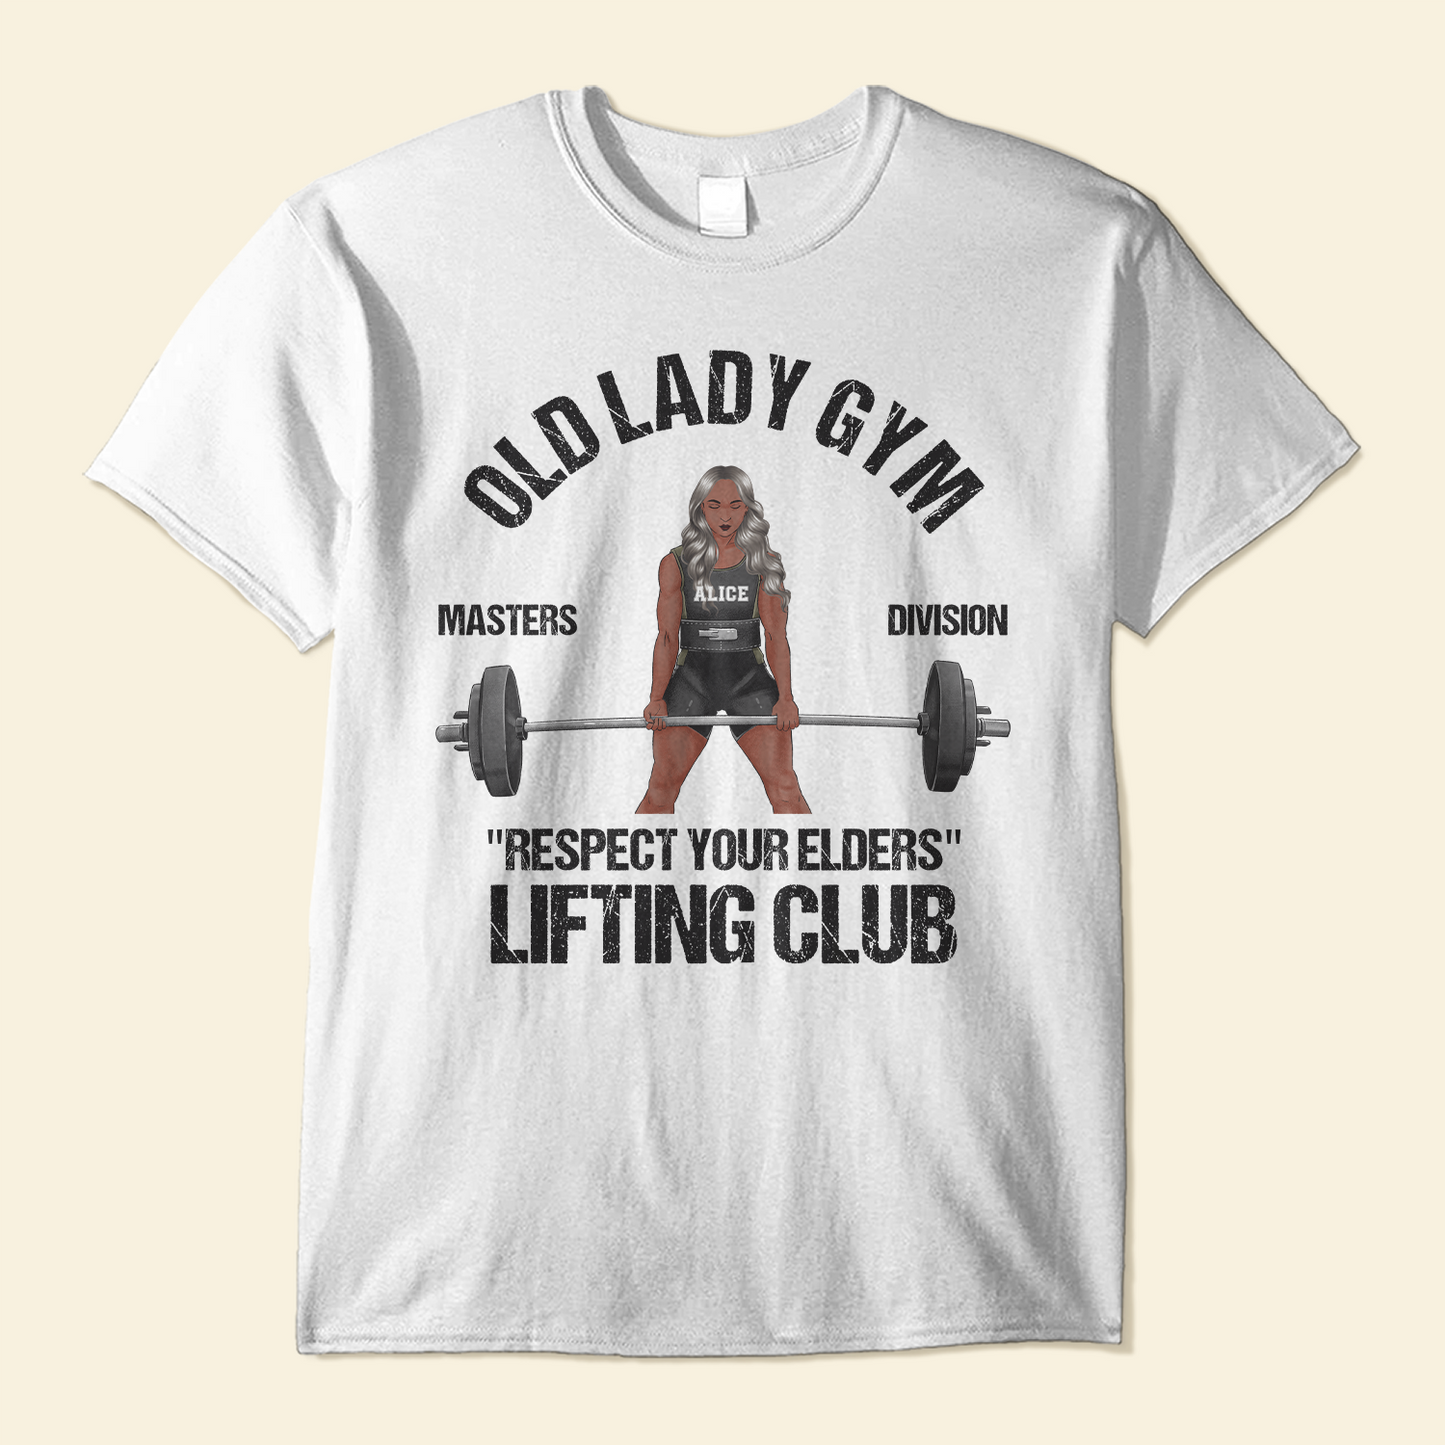 Gym Lover Gift Gym Workout T-Shirt by Jeff Creation - Pixels